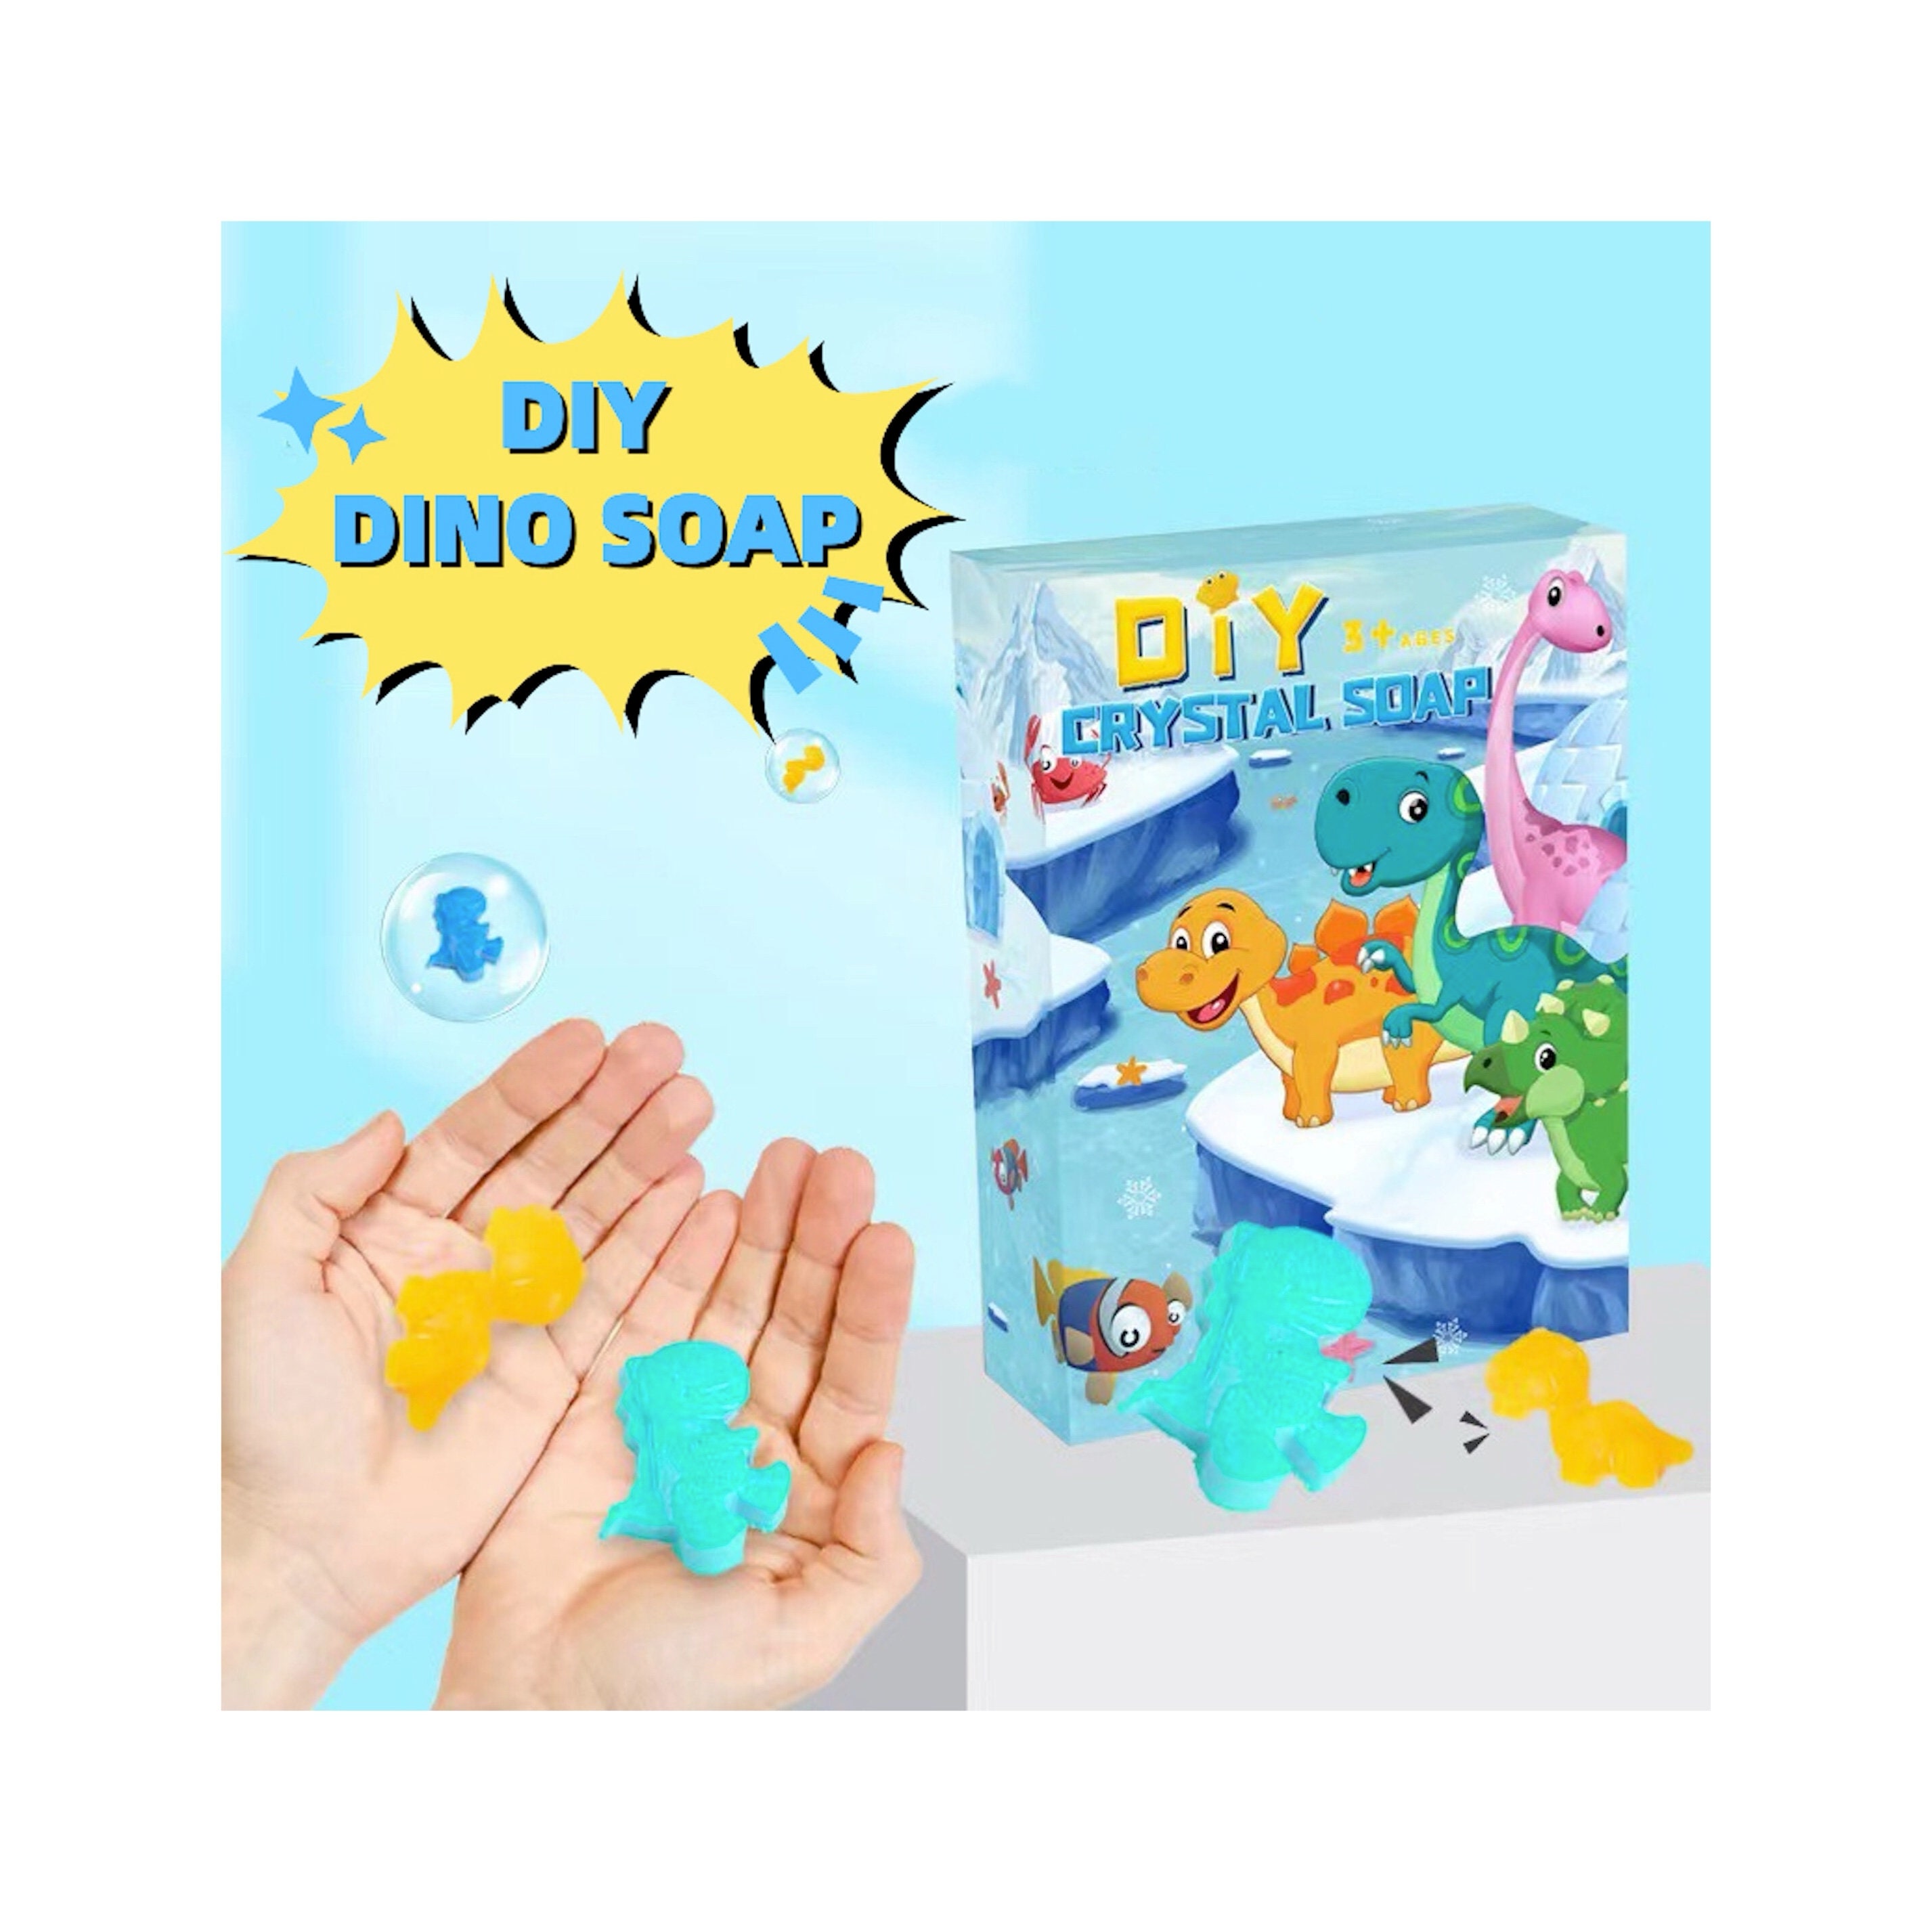 DIY Dino Soap Making Kit for Kids-best Educational STEM Activity Craft Gift  for Kids All Ages BEST Birthday Craft Gifts for Girls and Boys 